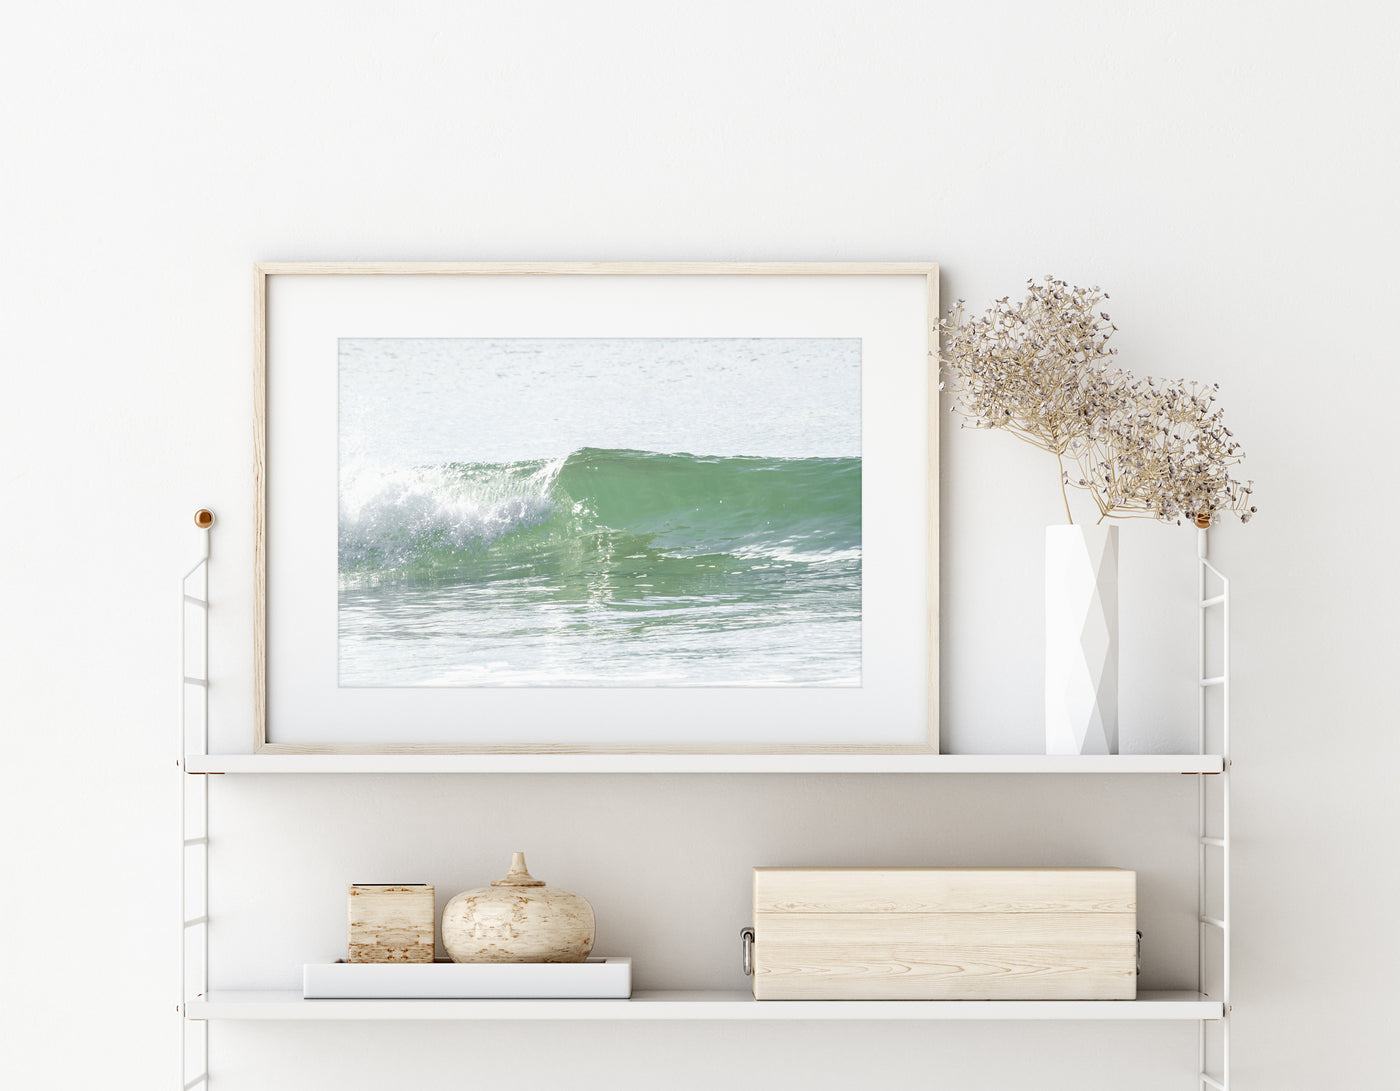 Ocean Waves No 10 - Fine art print by Cattie Coyle Photography